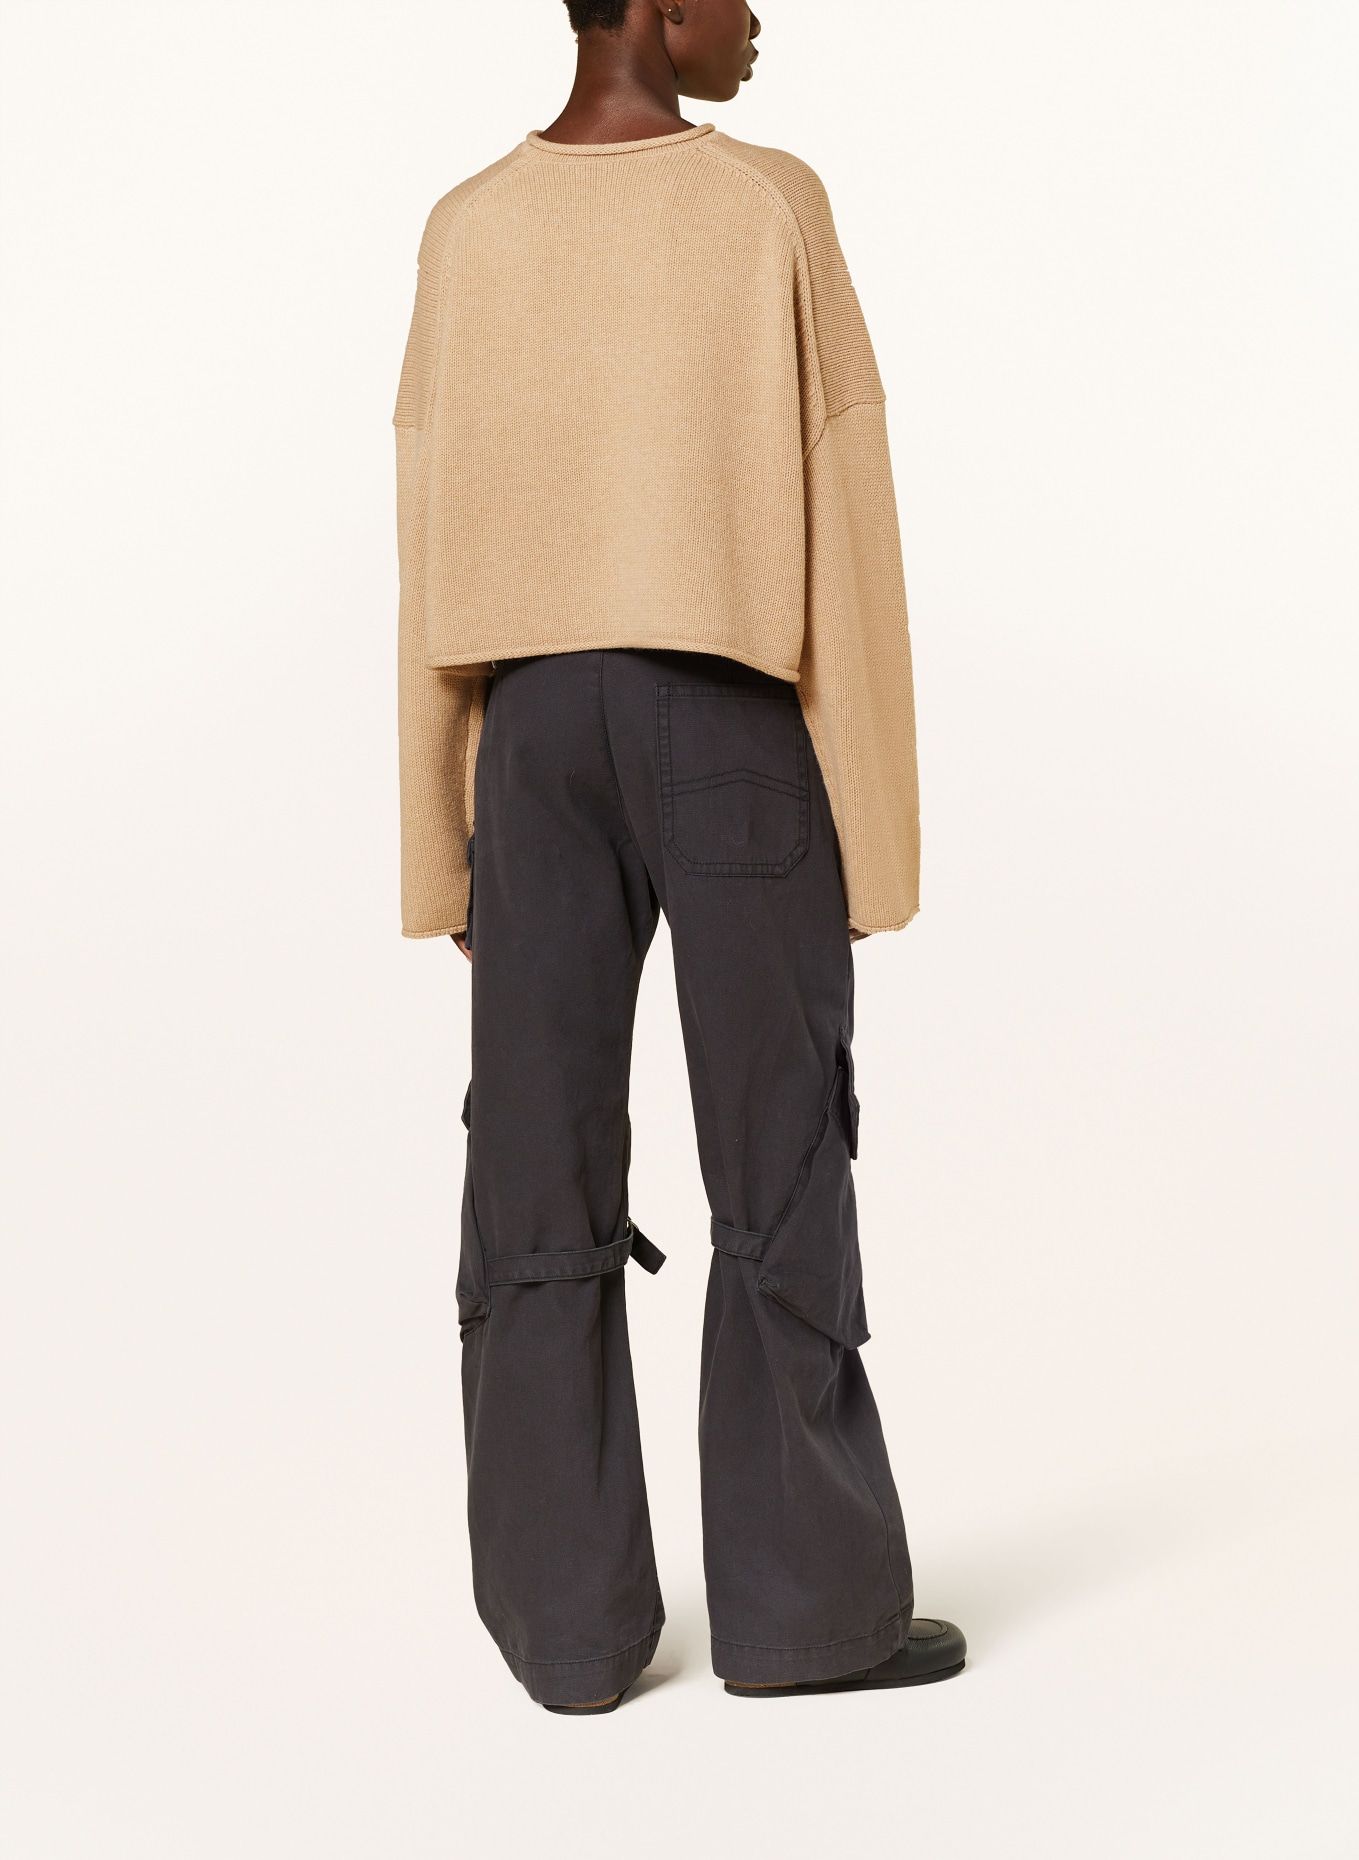 JW ANDERSON Cropped sweater, Color: BEIGE (Image 3)